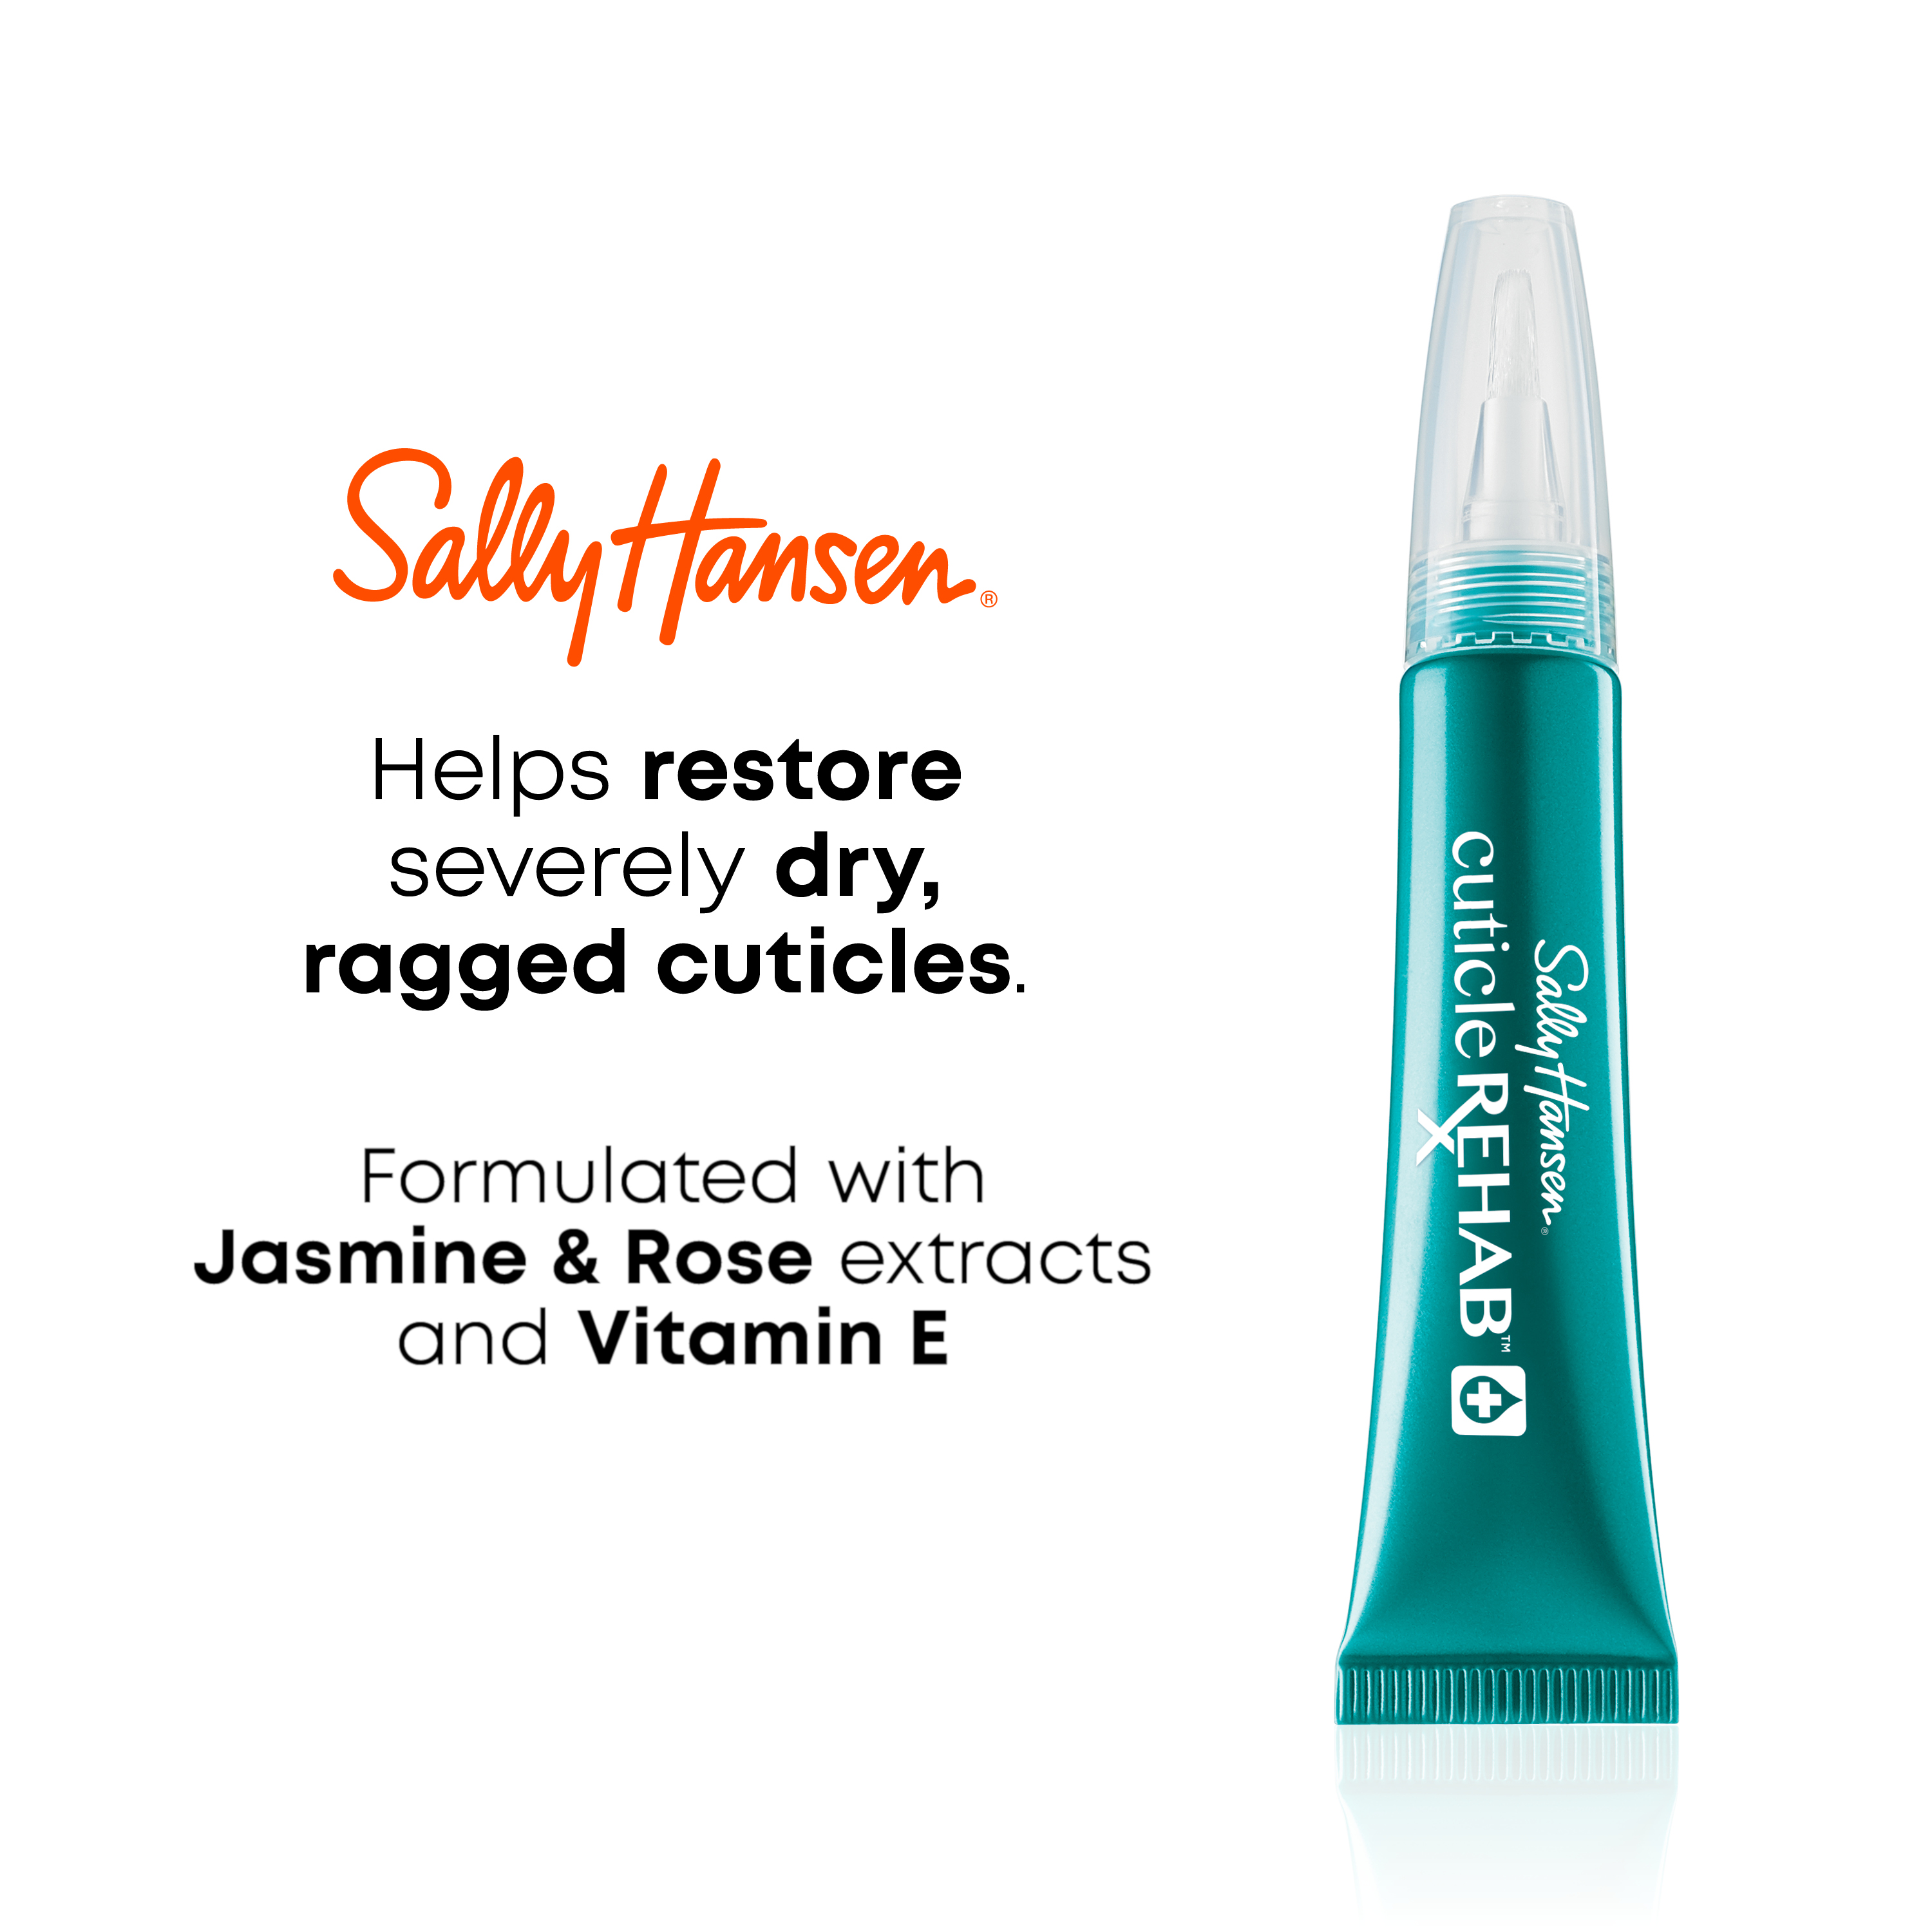 Sally Hansen Treatment Cuticle Rehab, 0.29 fl oz, Calms, Soothes and Nourishes - image 2 of 5